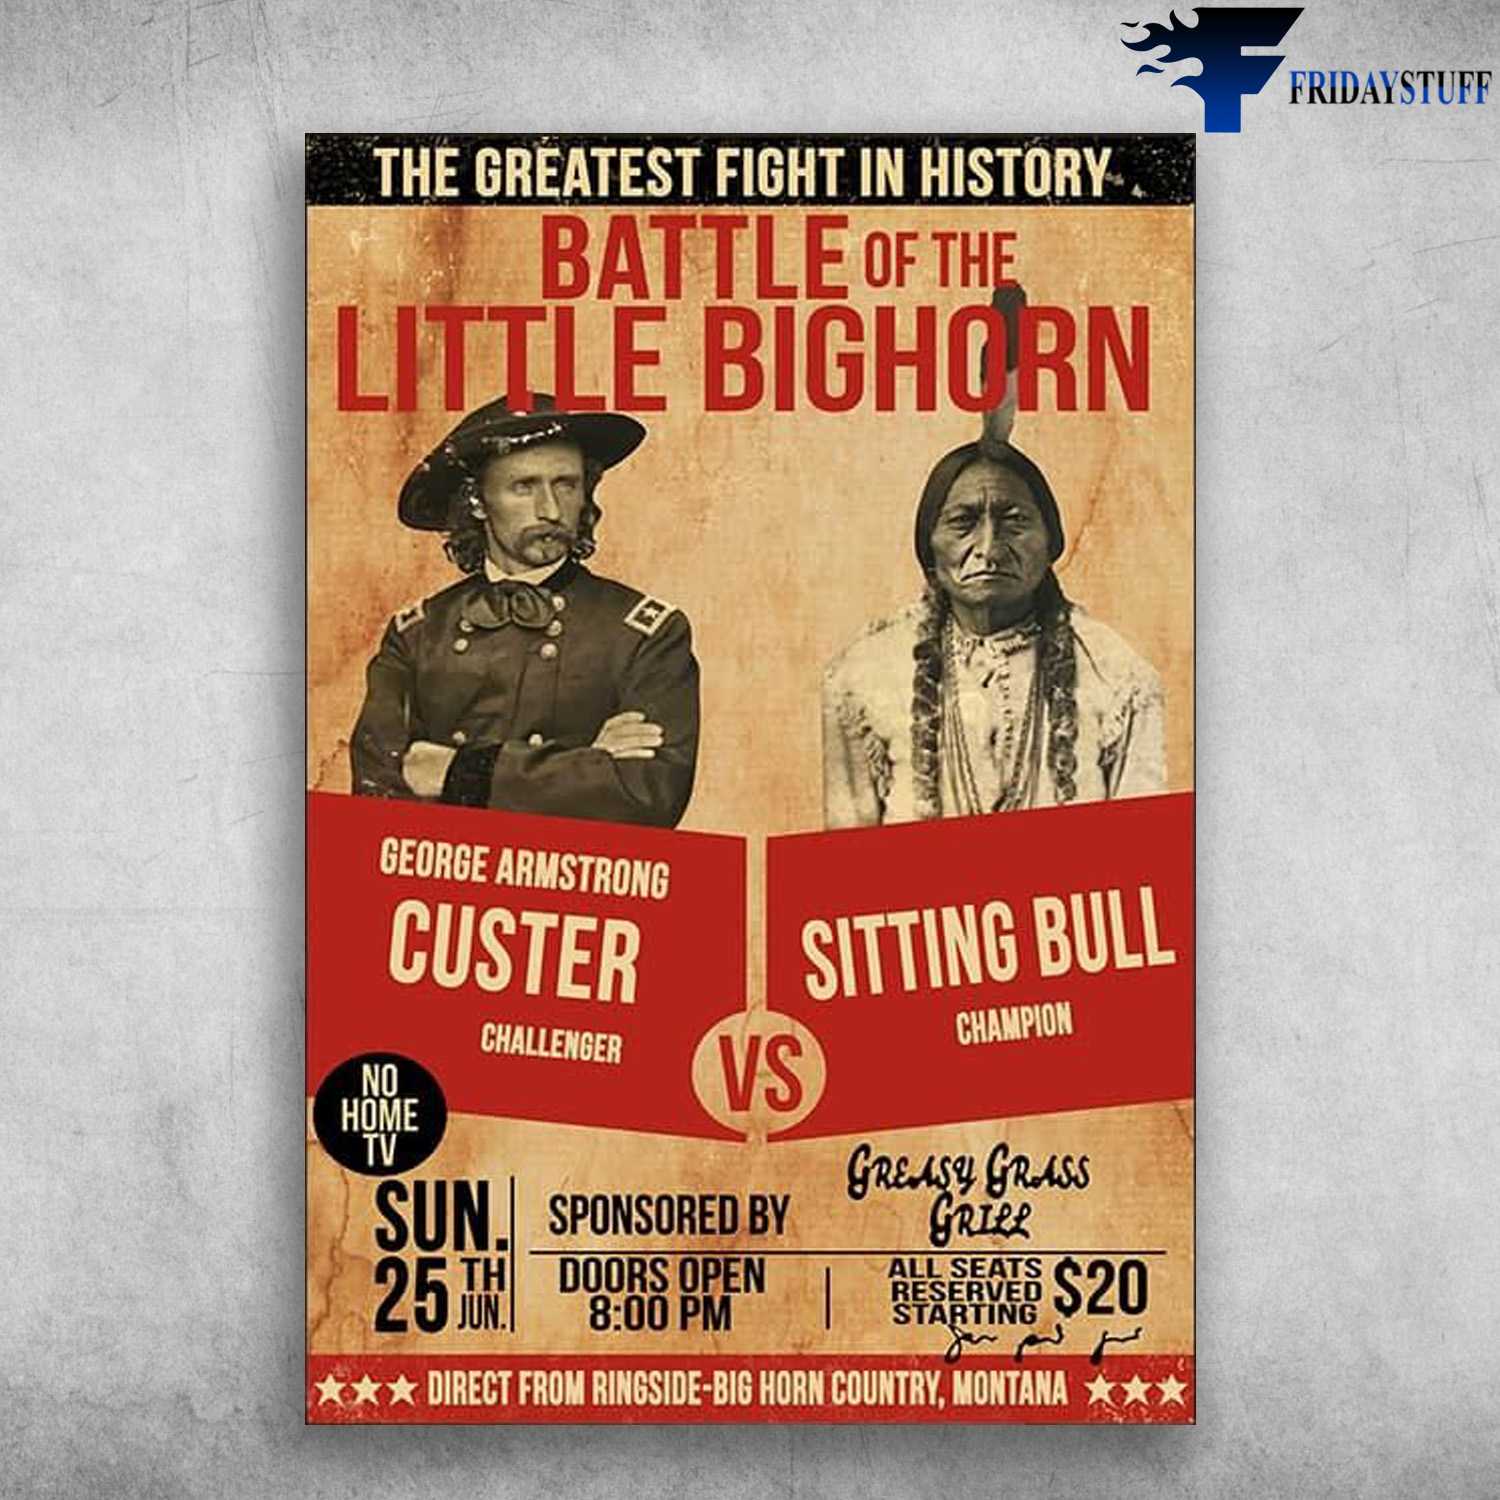 The Greatest Fight In History - Battle Of The Little Bighorn, George Armstrong Custer Challenger, Sitting Bull Champion, No Home TV